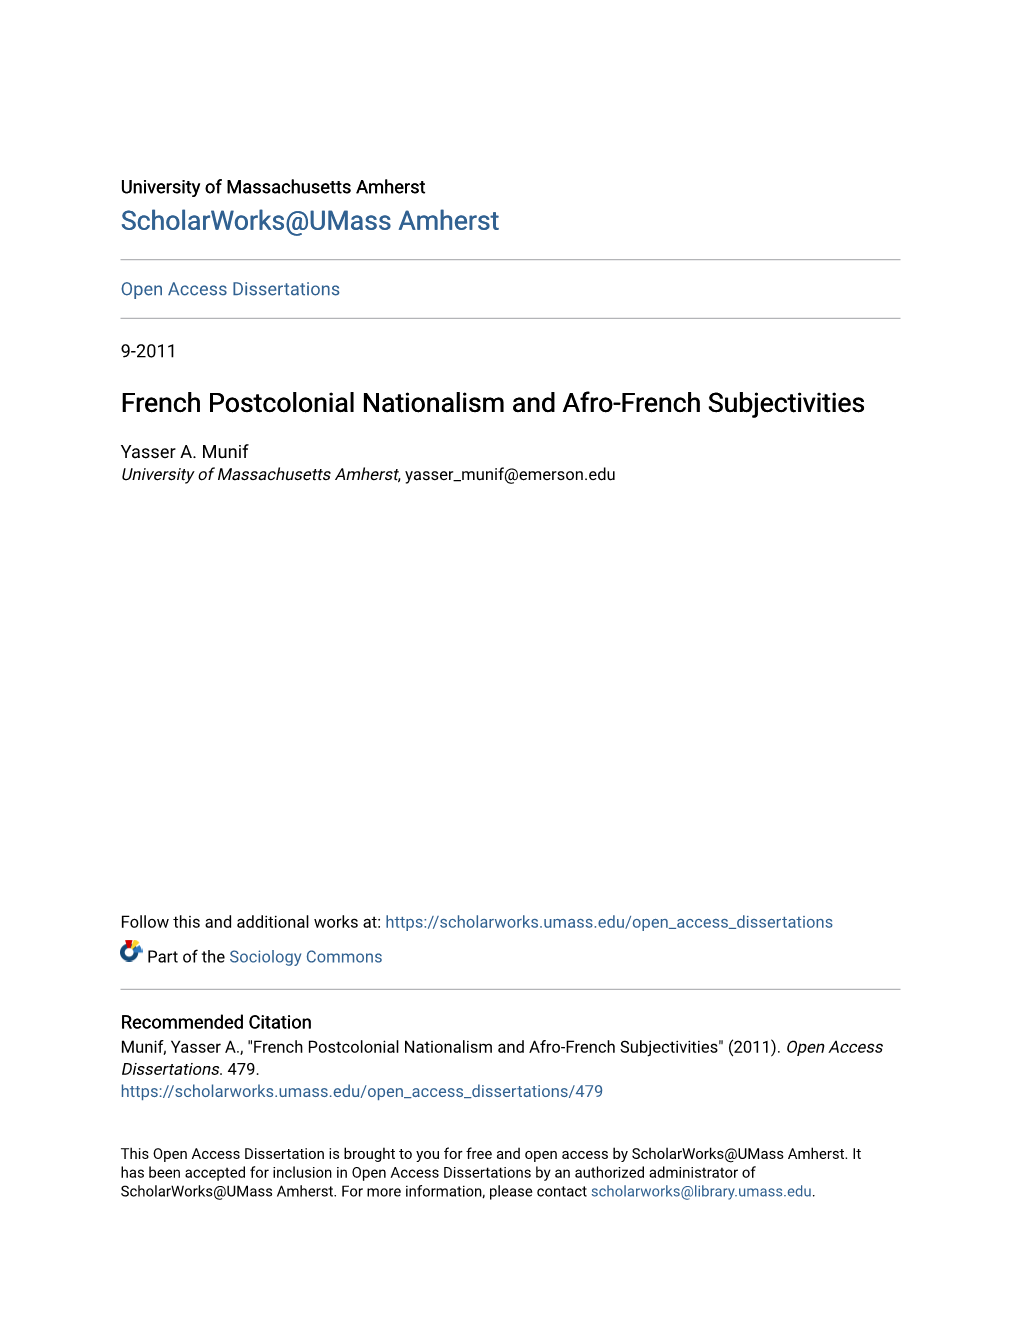 French Postcolonial Nationalism and Afro-French Subjectivities